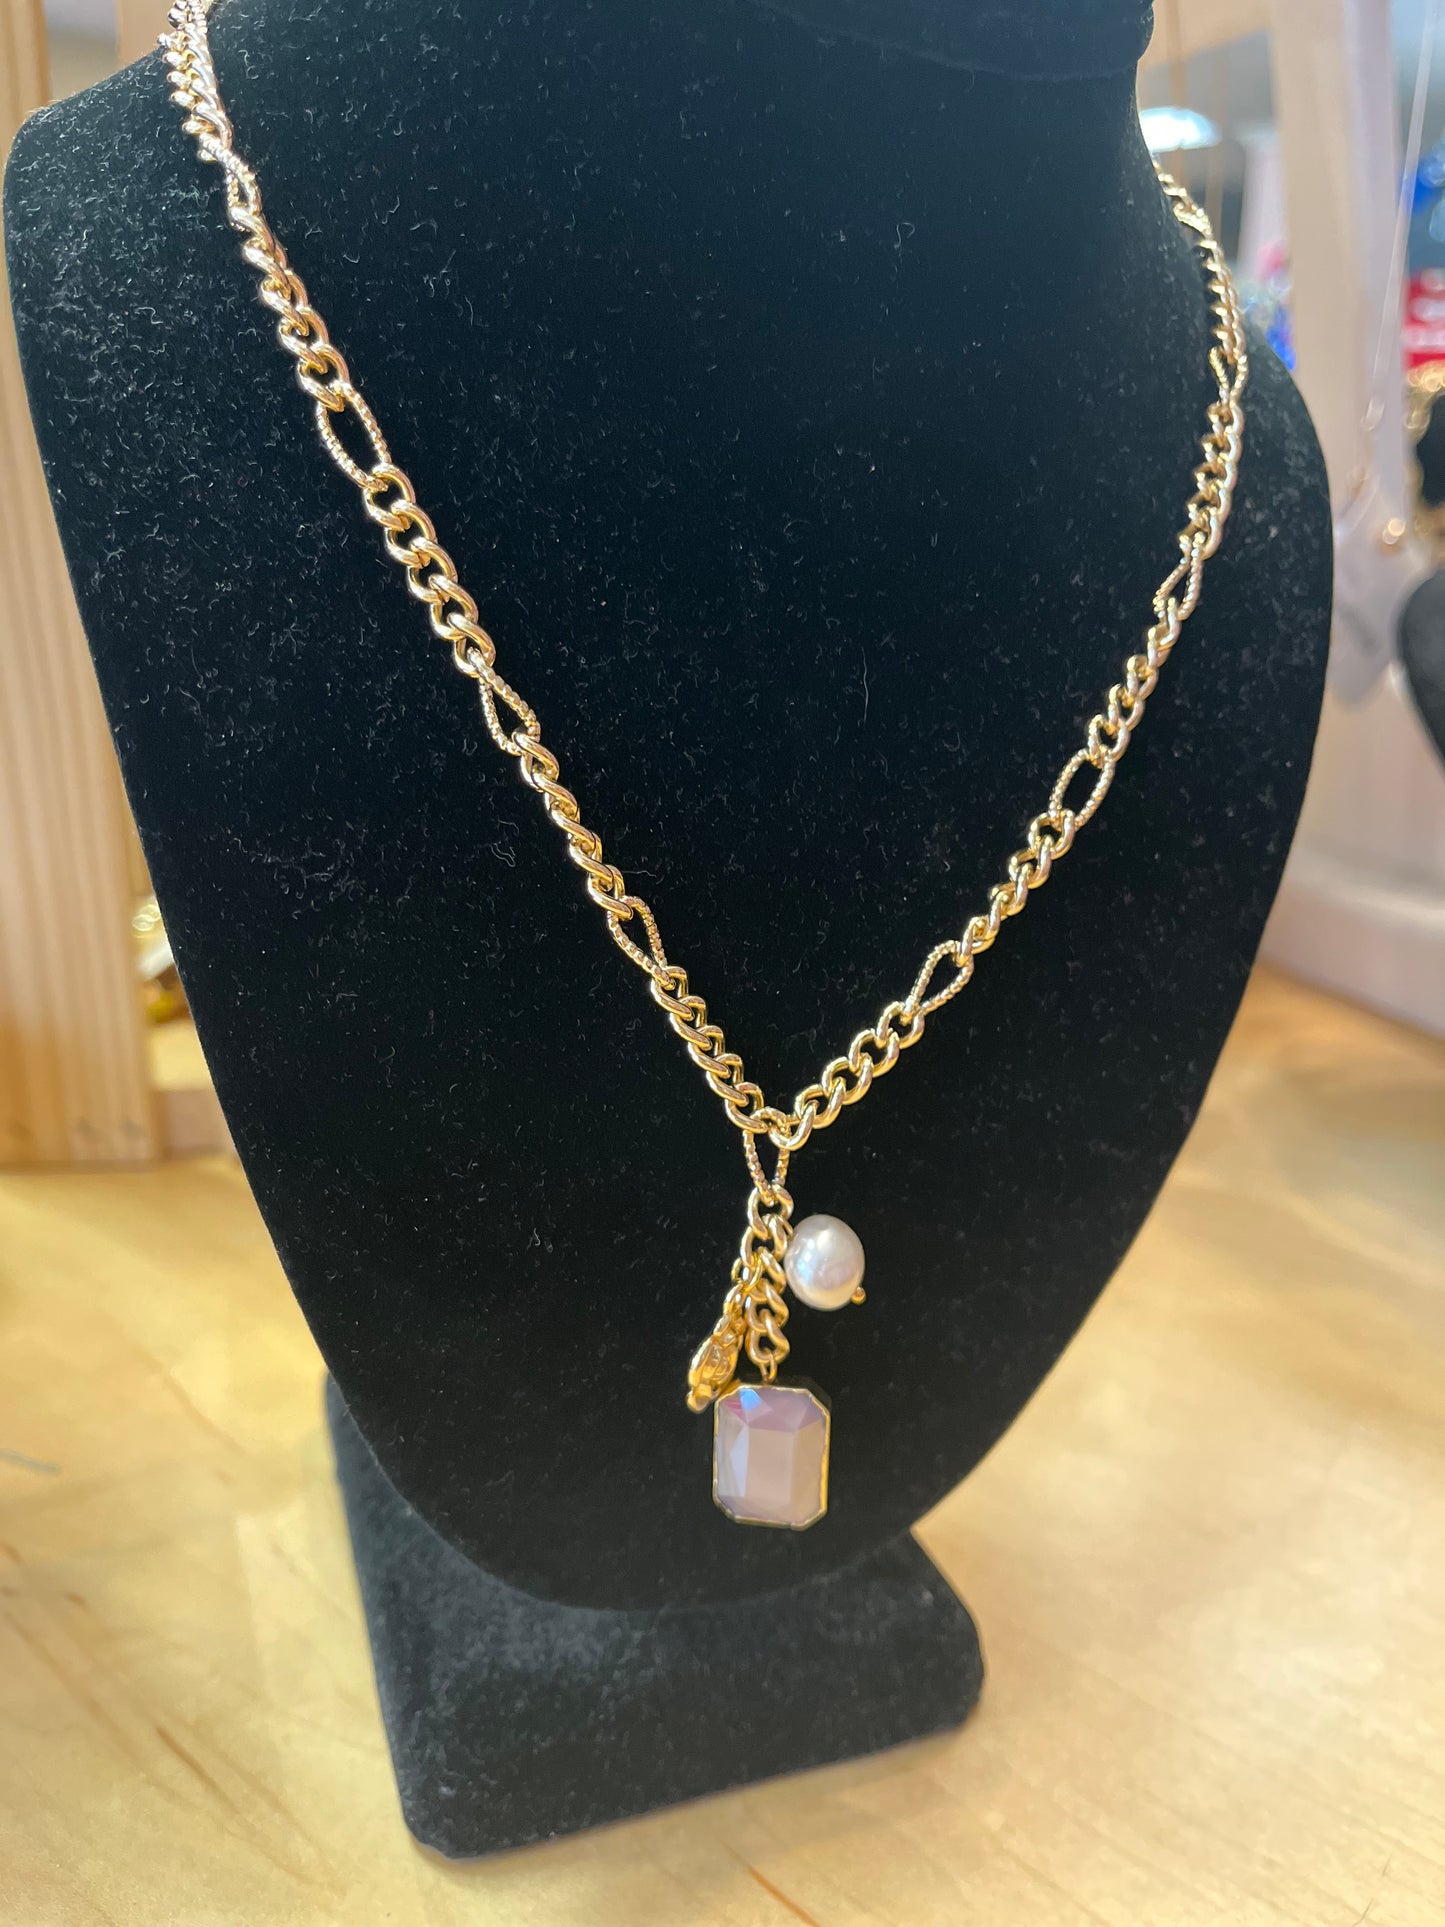 18K Gold Charm Necklace